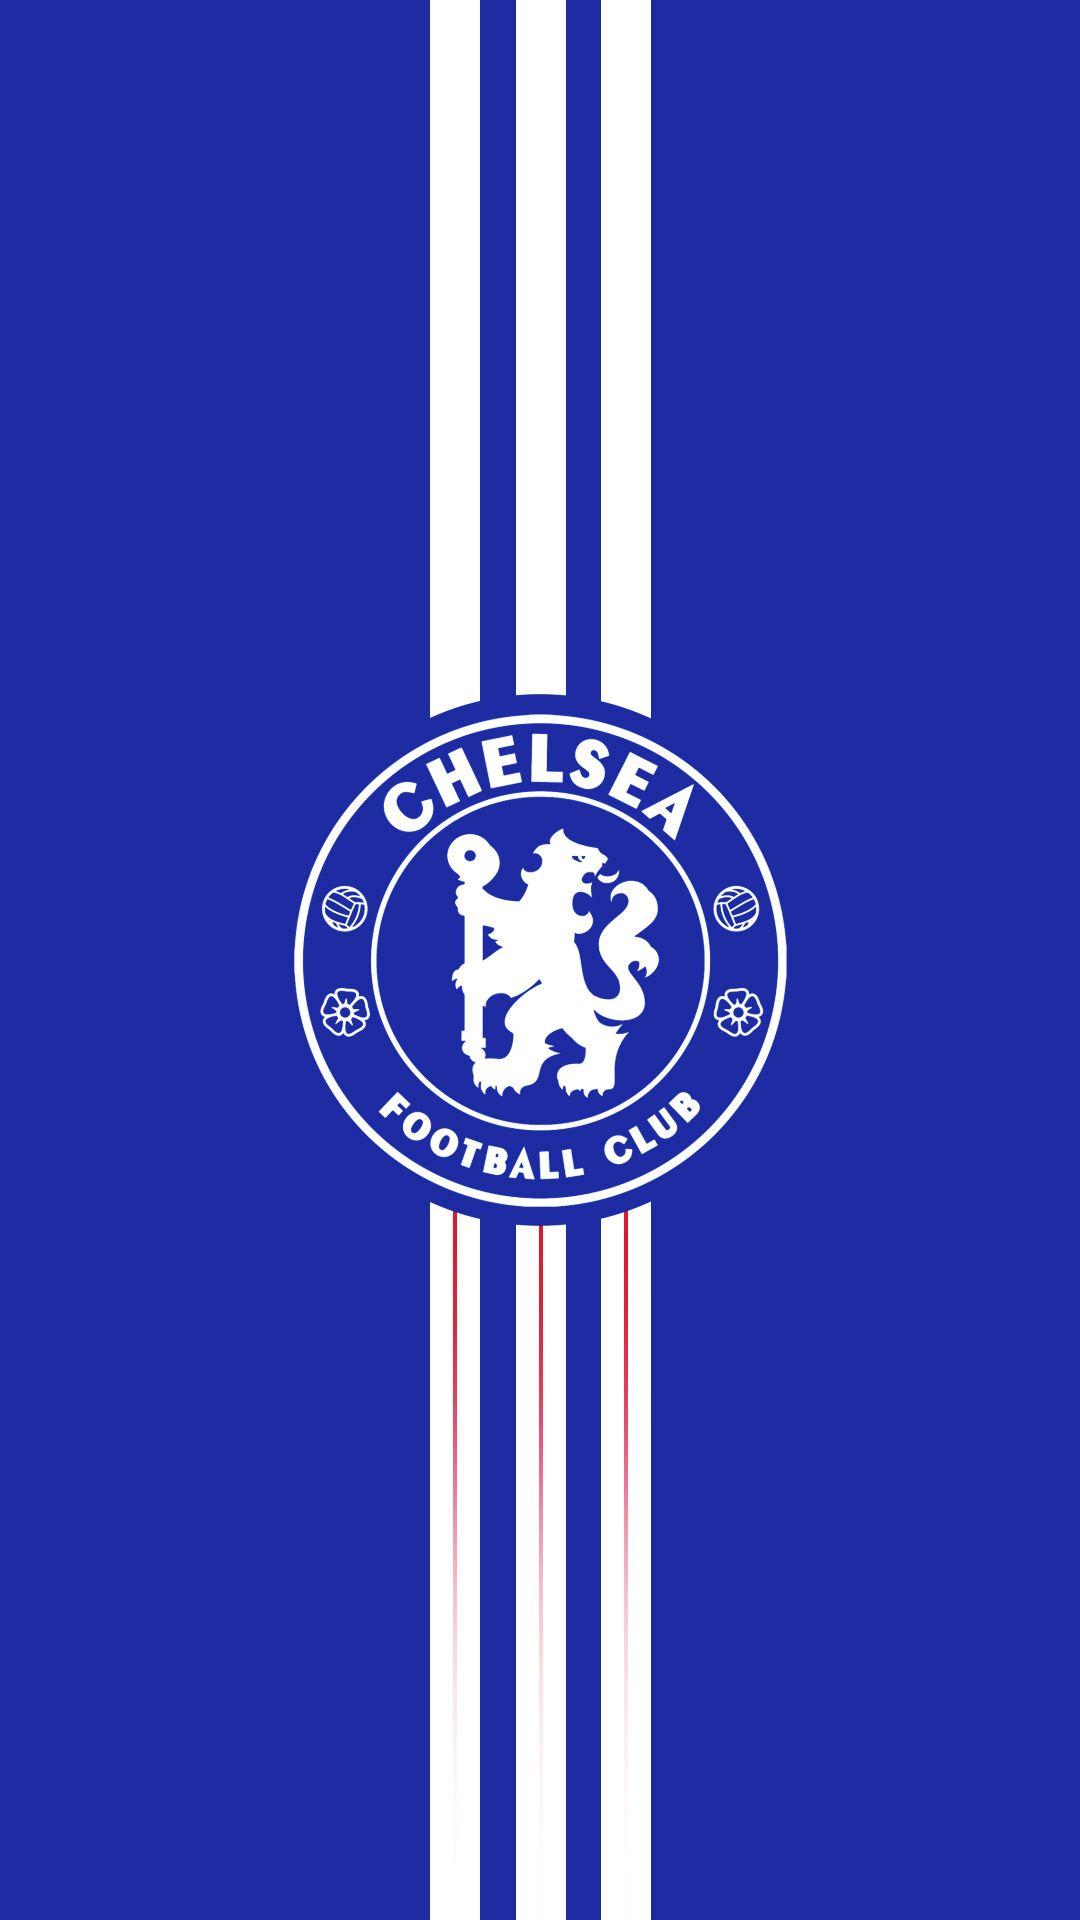 Any good looking Chelsea wallpapers for iPhone  rchelseafc